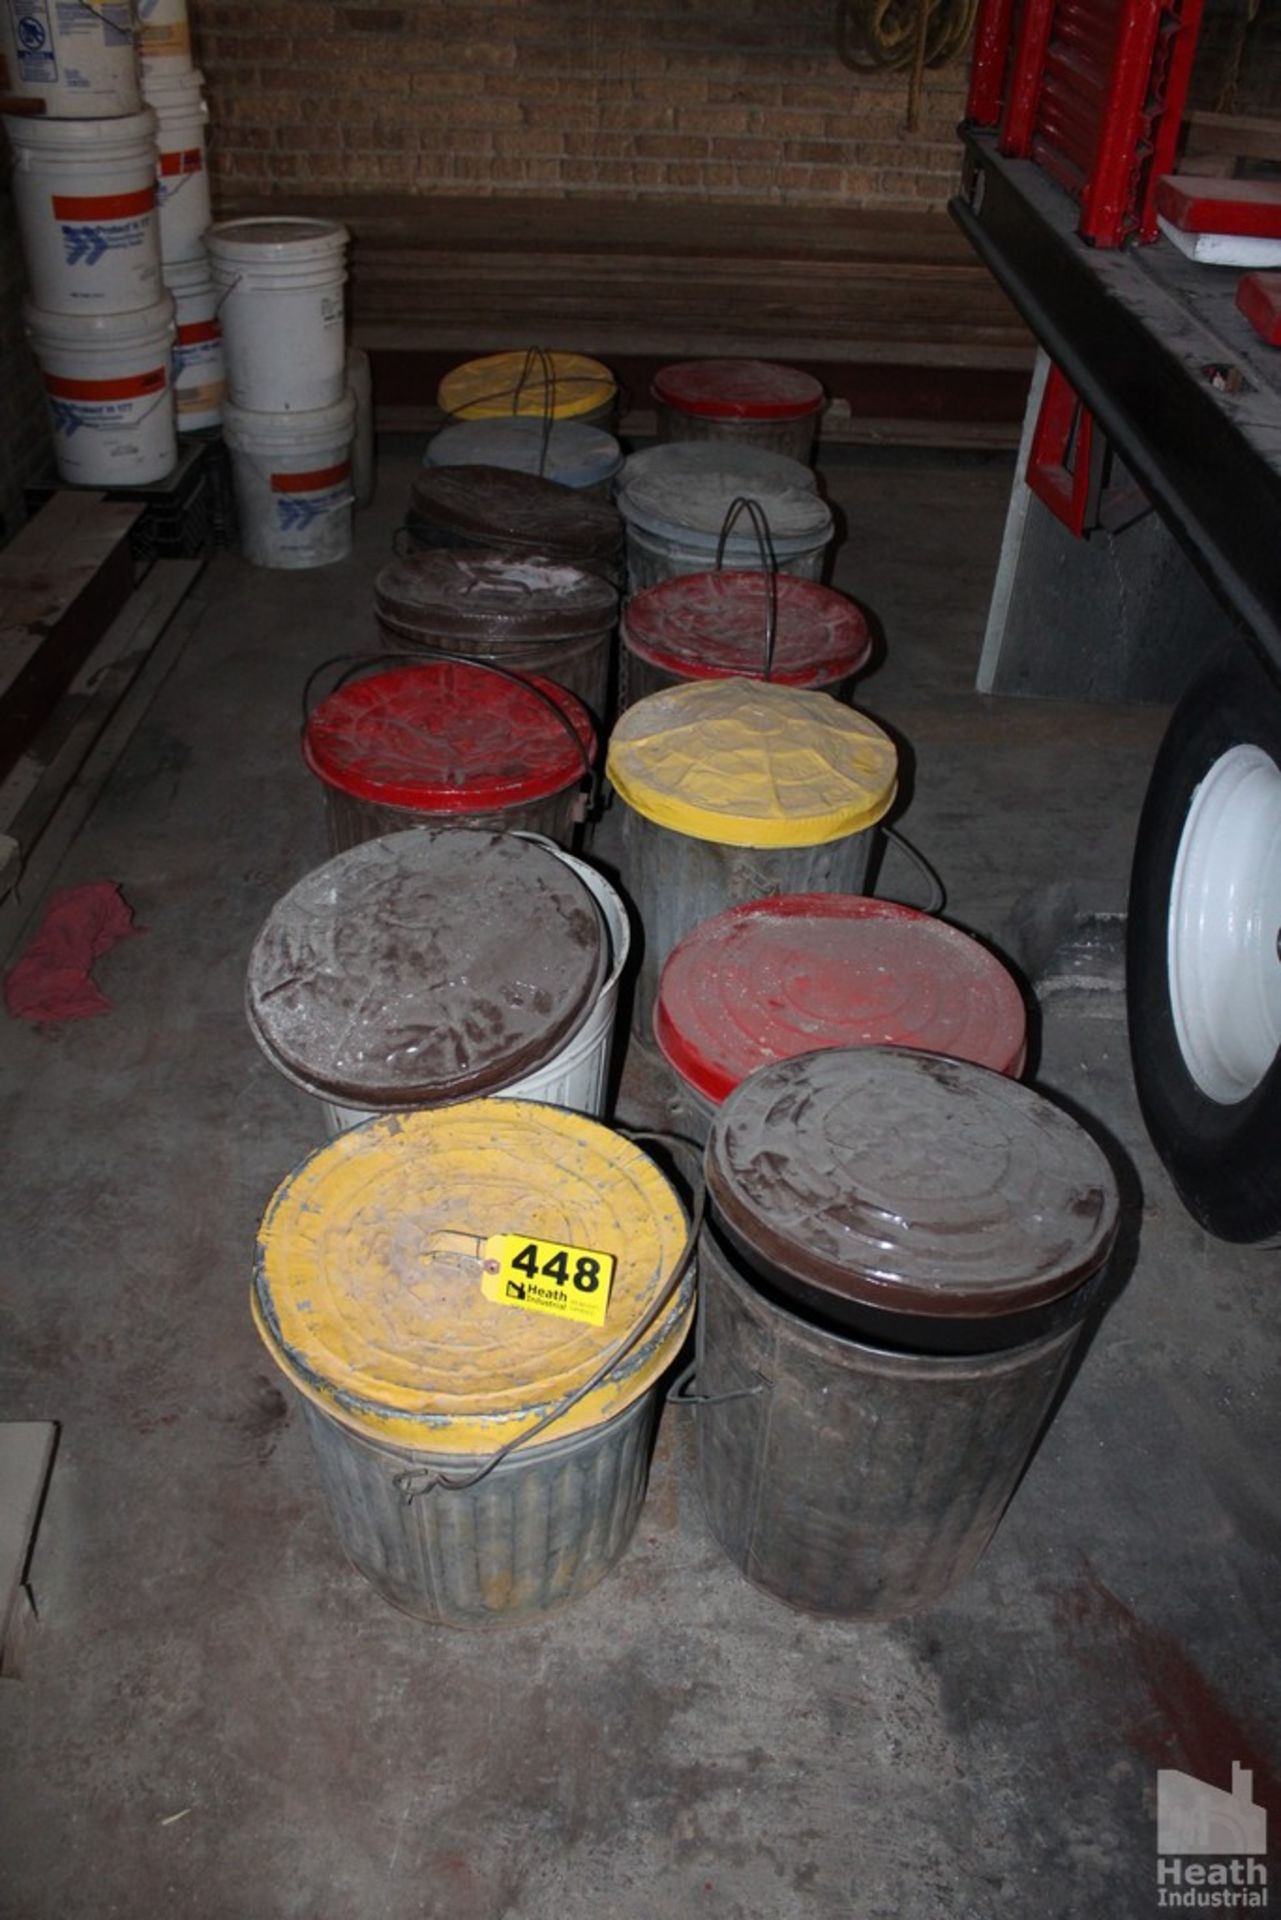 (14) STEEL PAILS WITH LIDS AND SOME MORTAR MIX